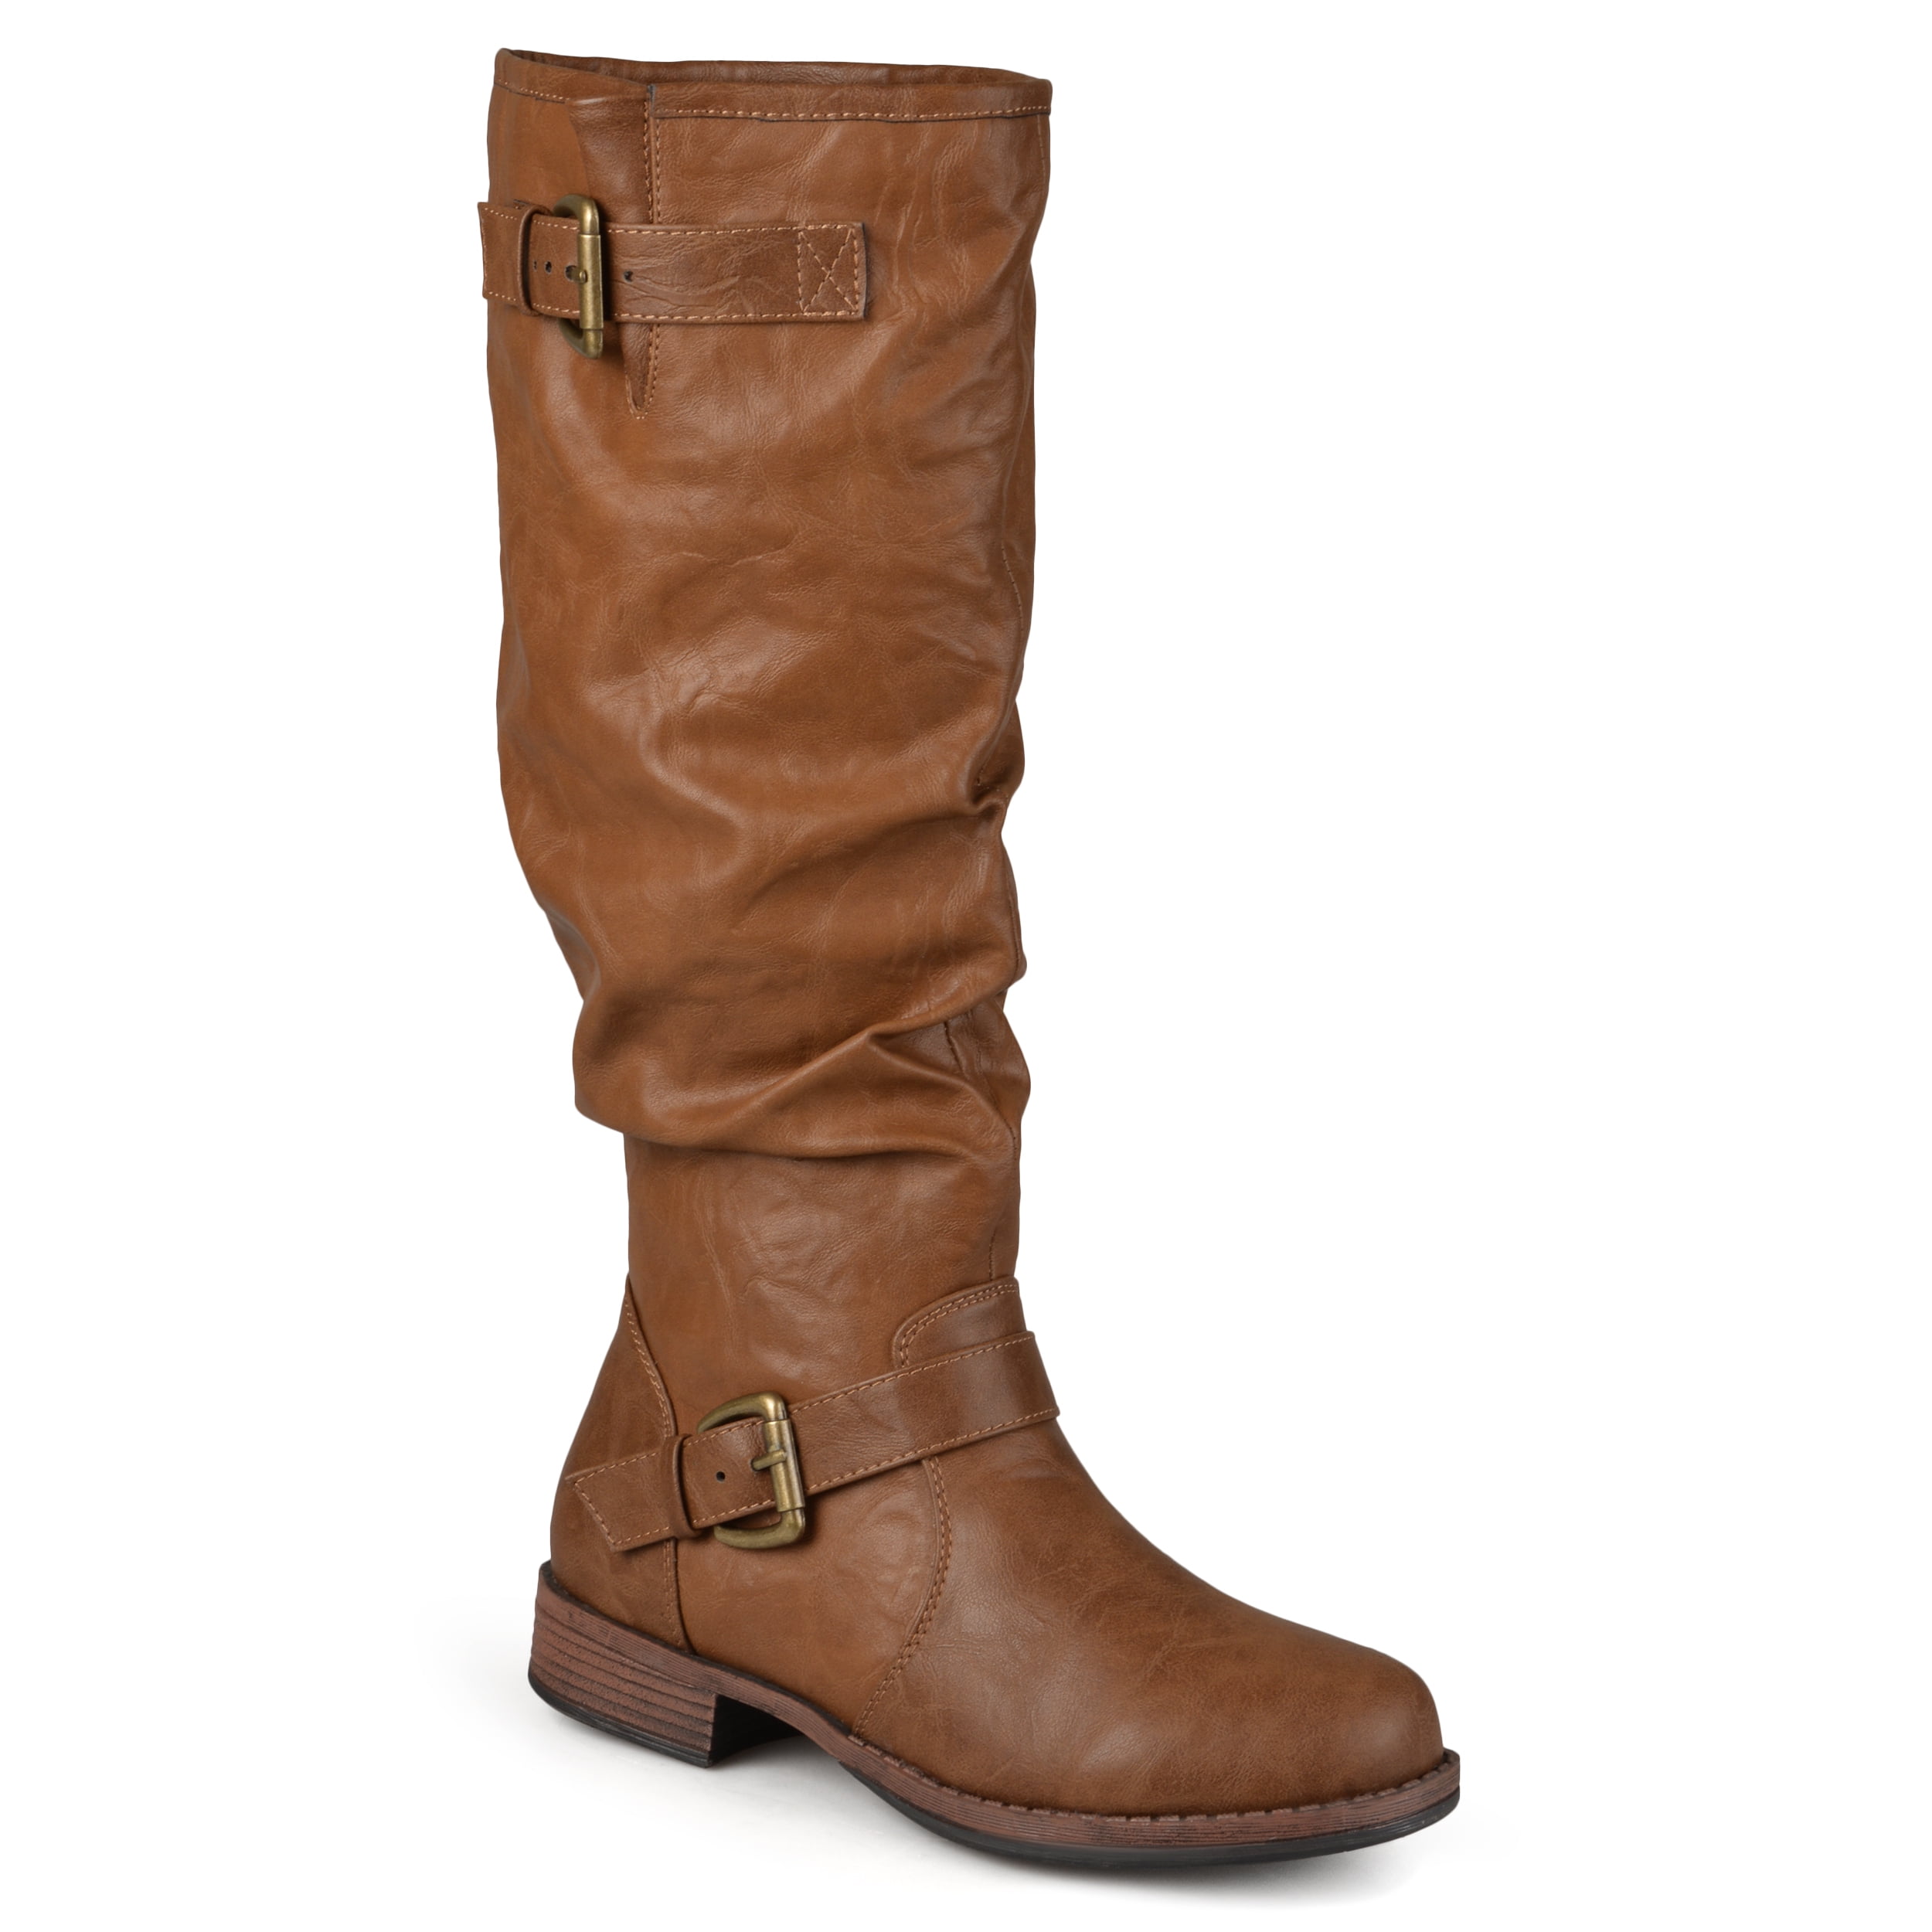 Brinley Co. Women's Extra Wide Calf Knee High Faux Leather Riding Boots 